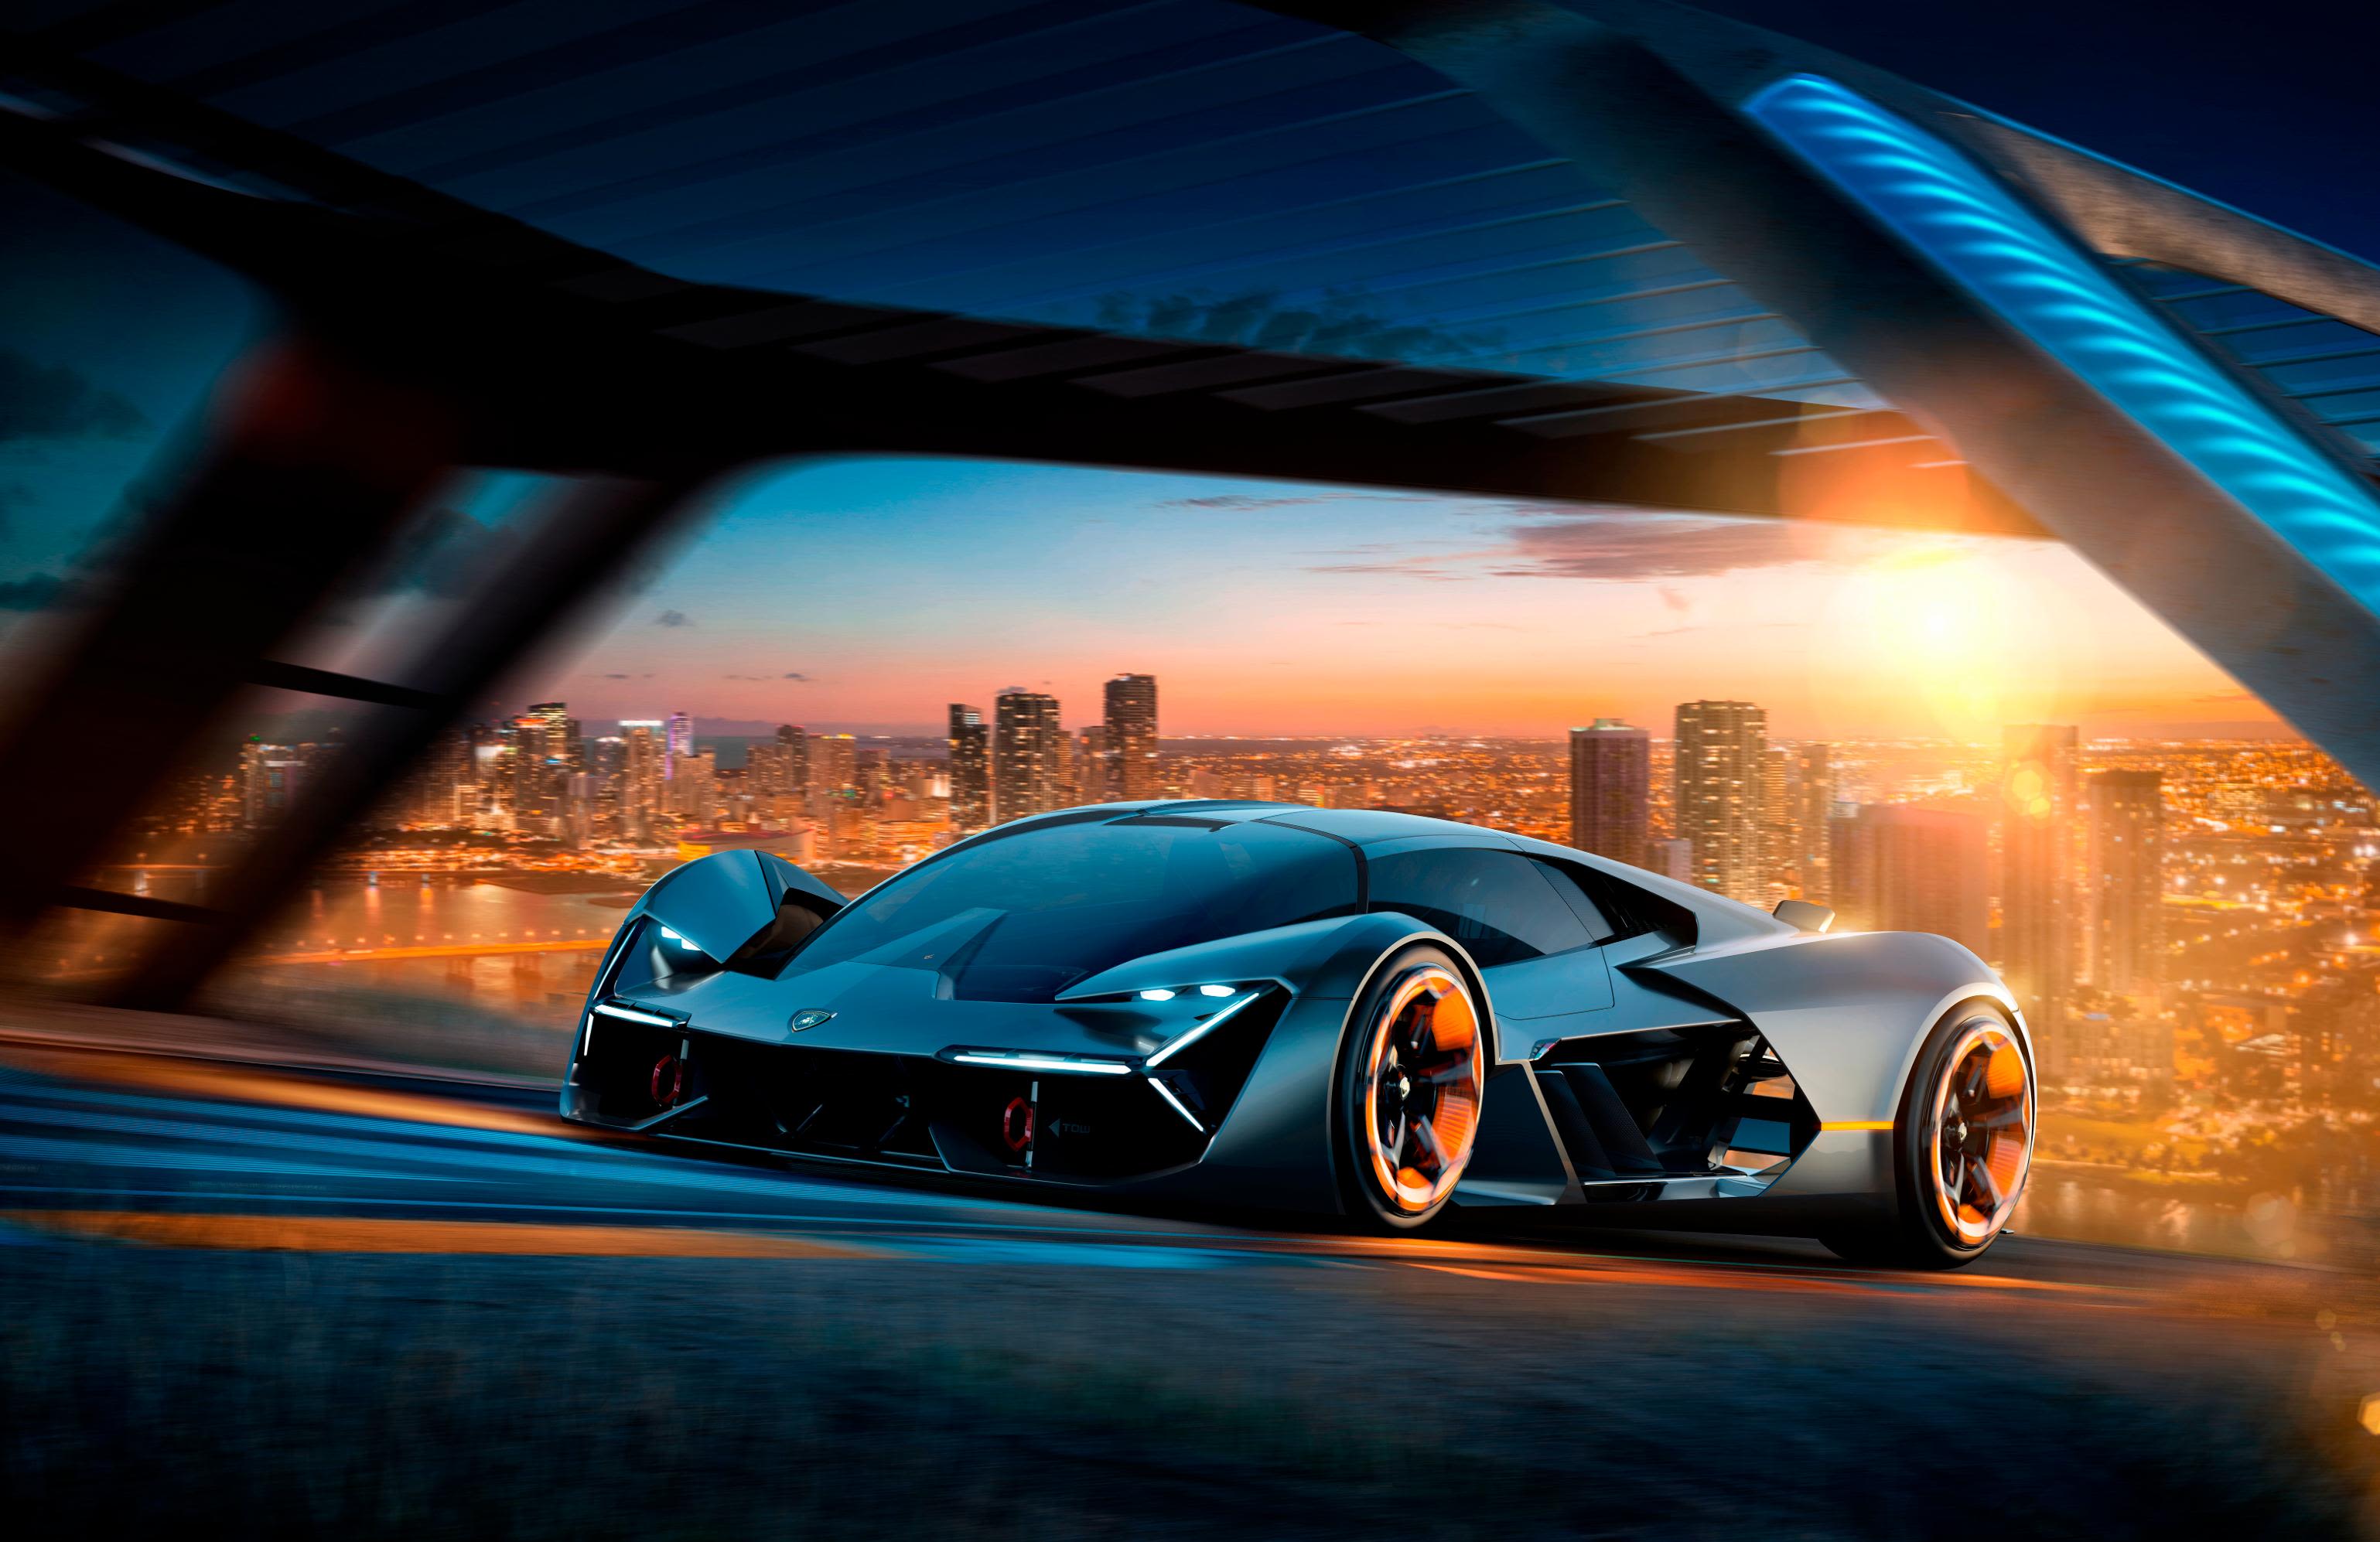 Lamborghini Sian Roadster Might Look Even Better Than The Coupe